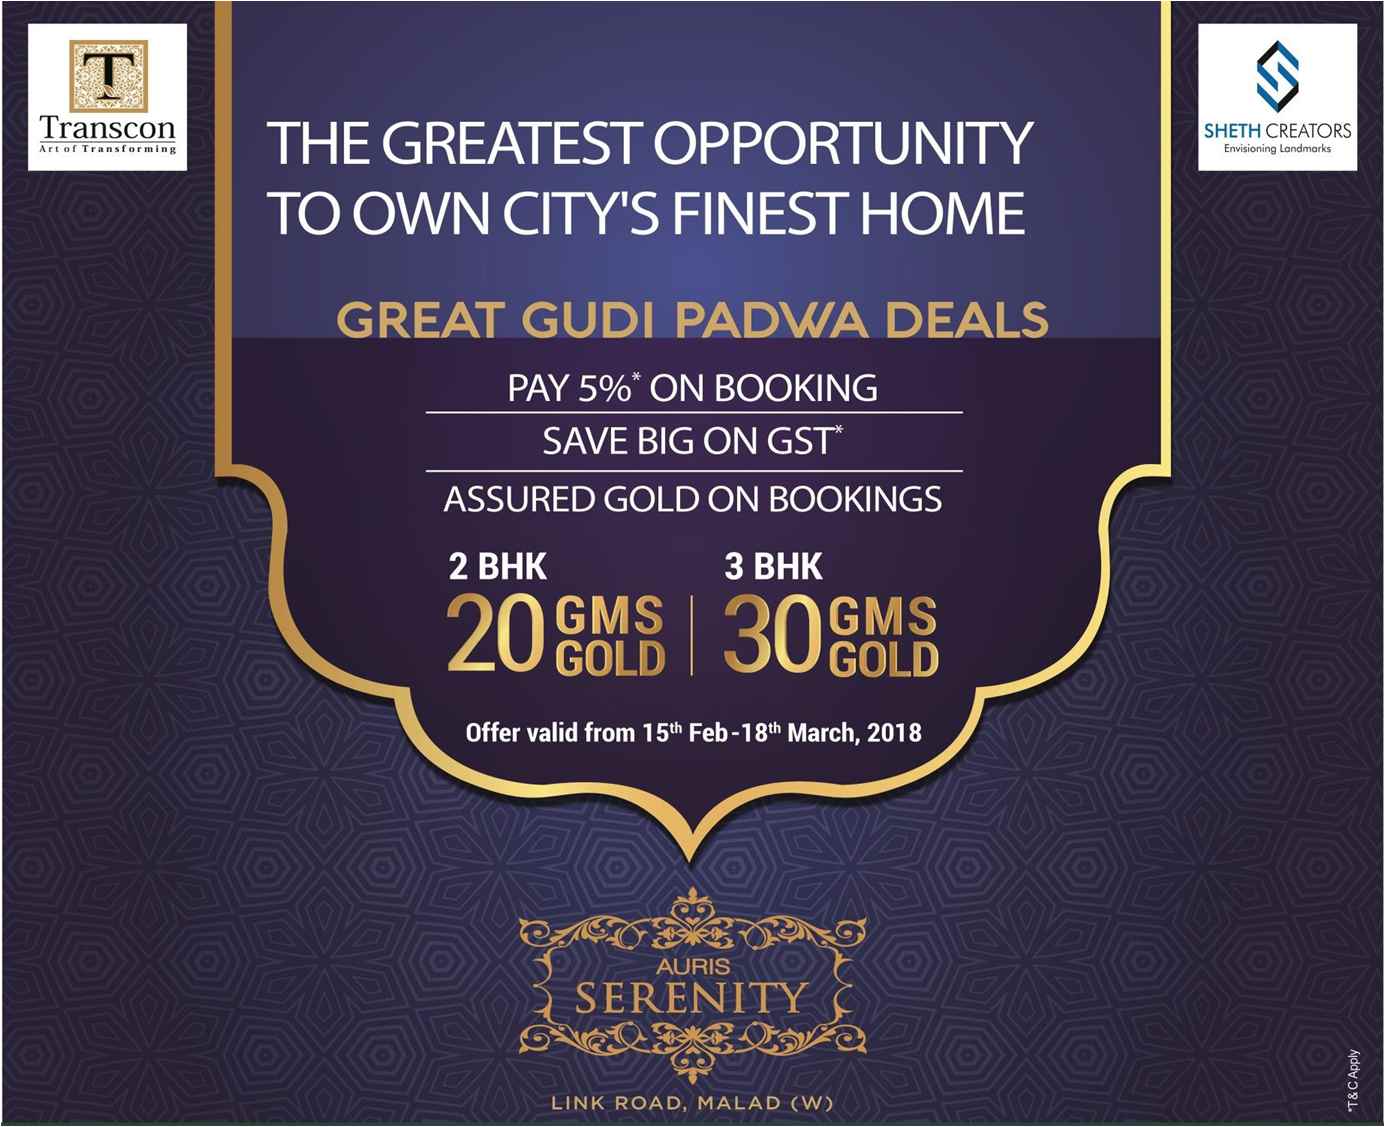 The greatest opportunity to own city's finest home during Gudi Padwa deals at Sheth Auris Serenity, Mumbai Update